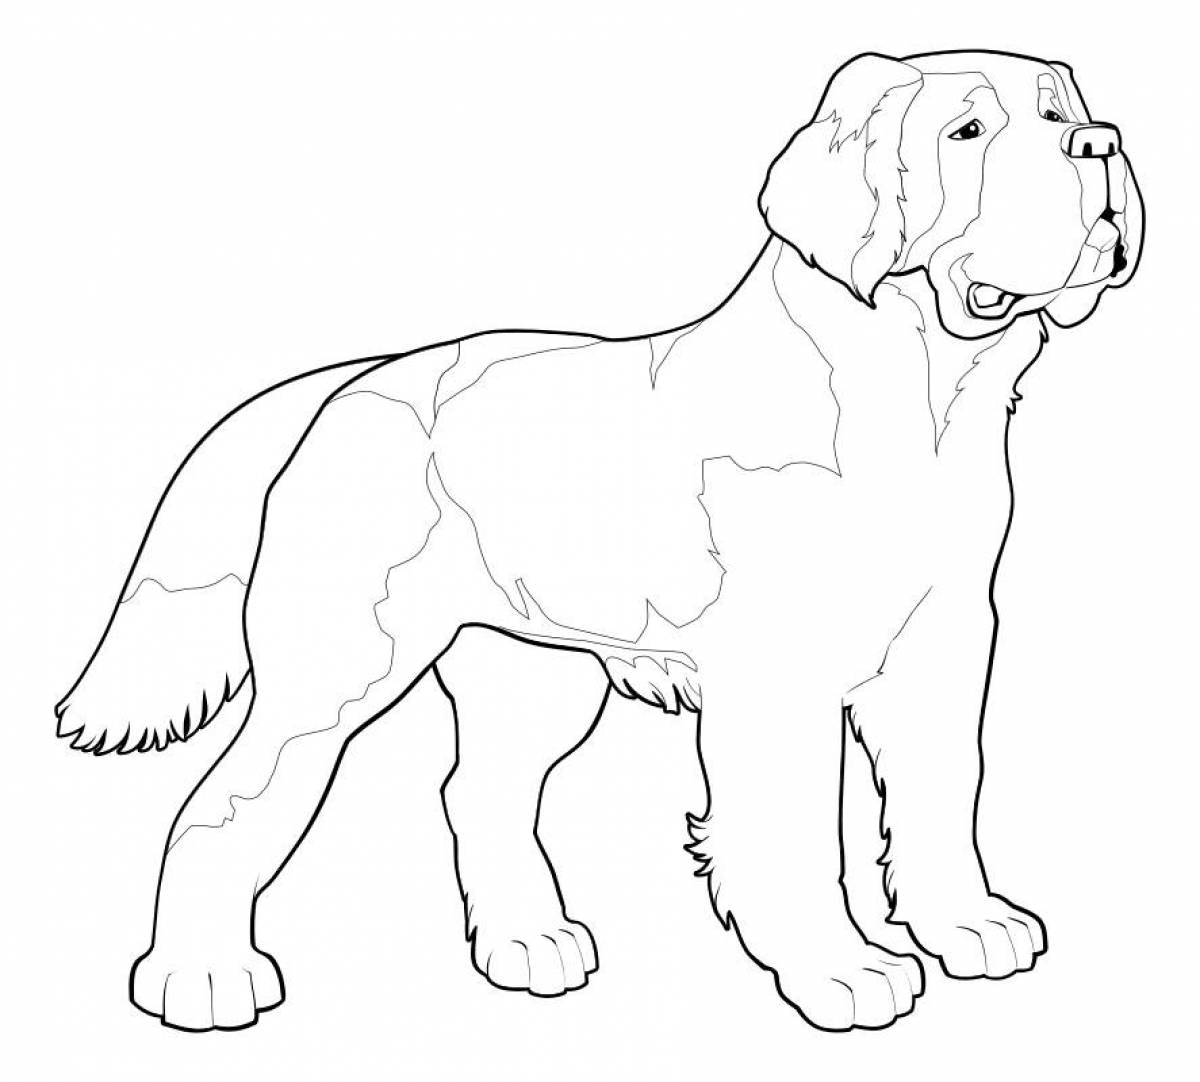 Brave dog coloring book